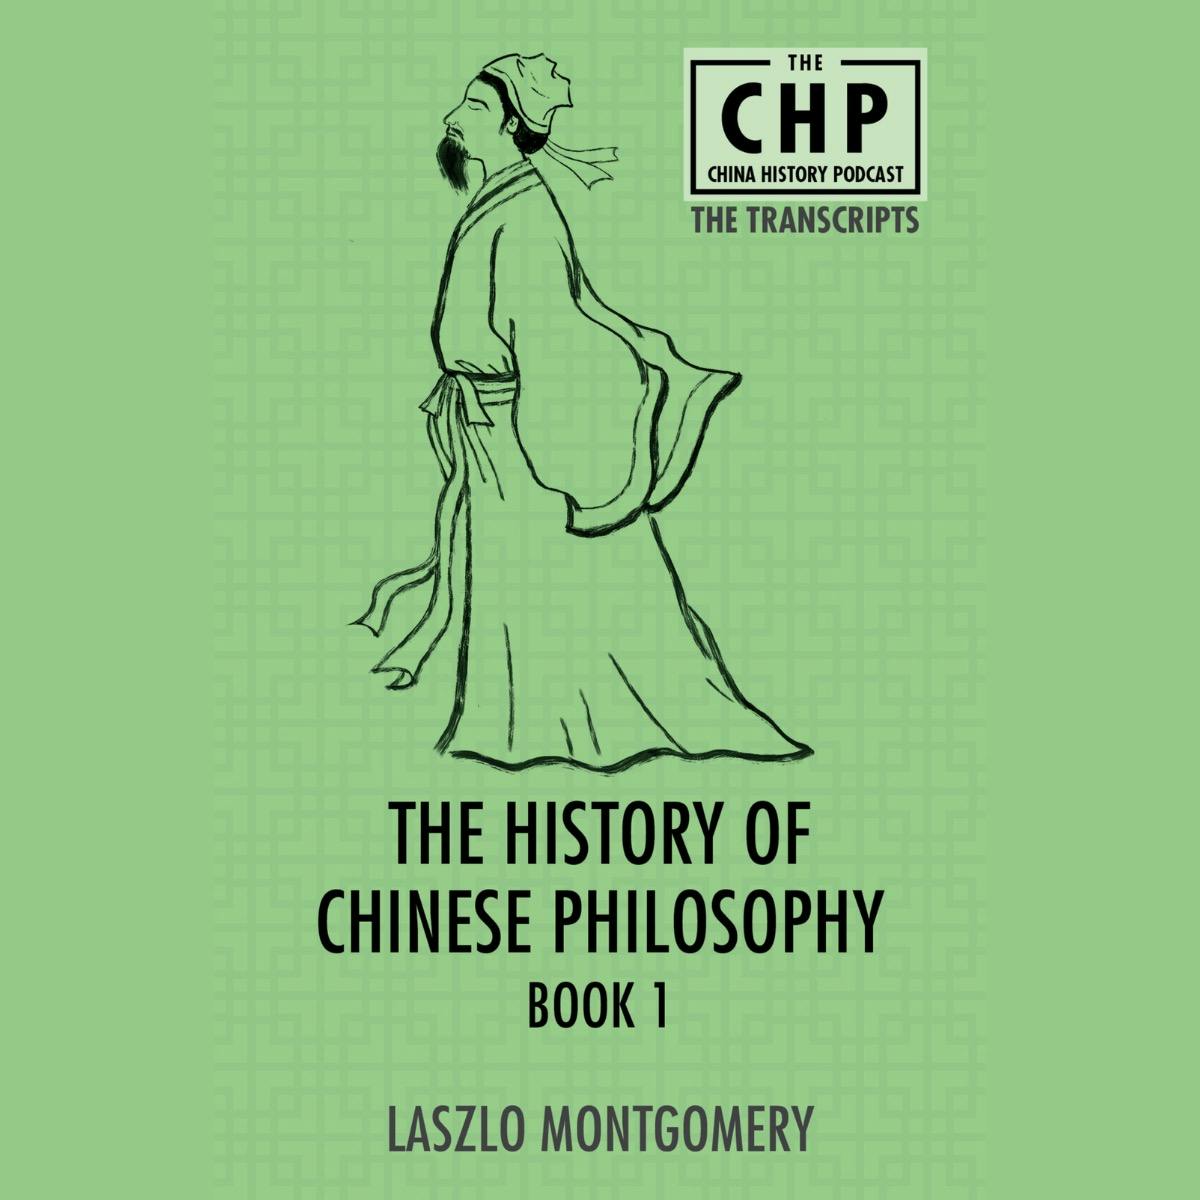 The History of Chinese Philosophy (Part 2)